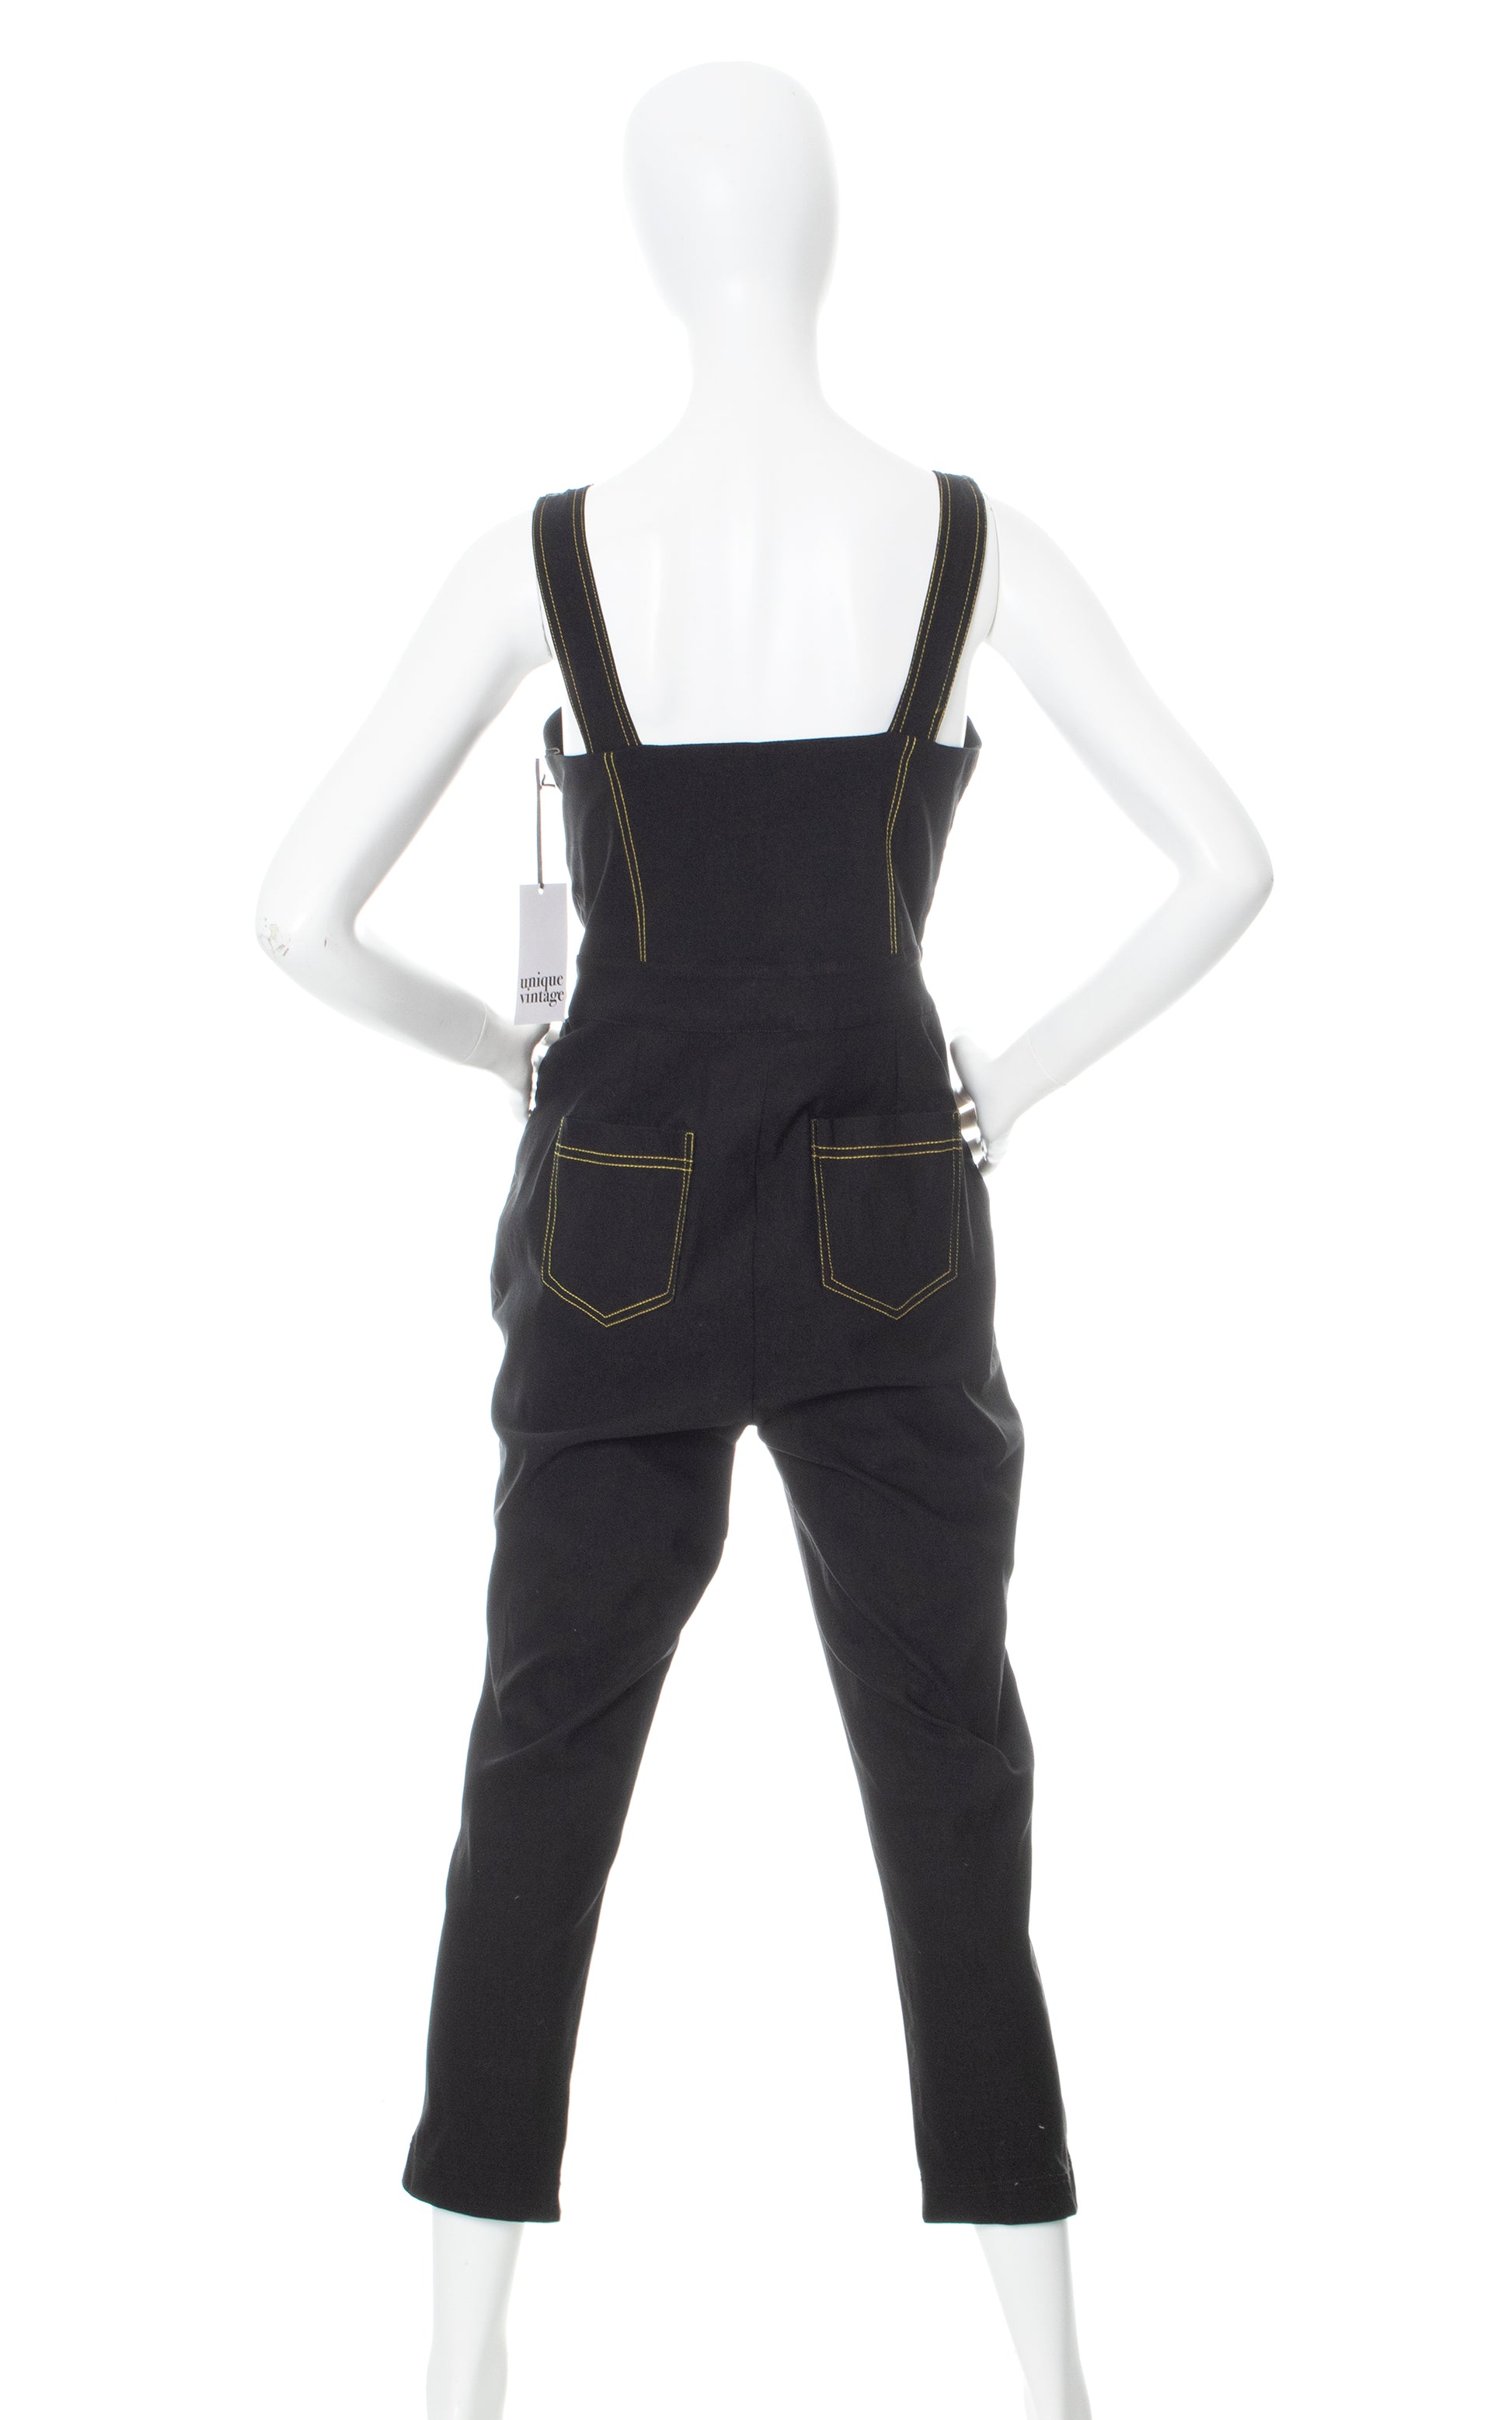 MODERN New with Tags UNIQUE VINTAGE Retro Stretchy Black Jeans Overalls Jumpsuit Birthday Life Vintage